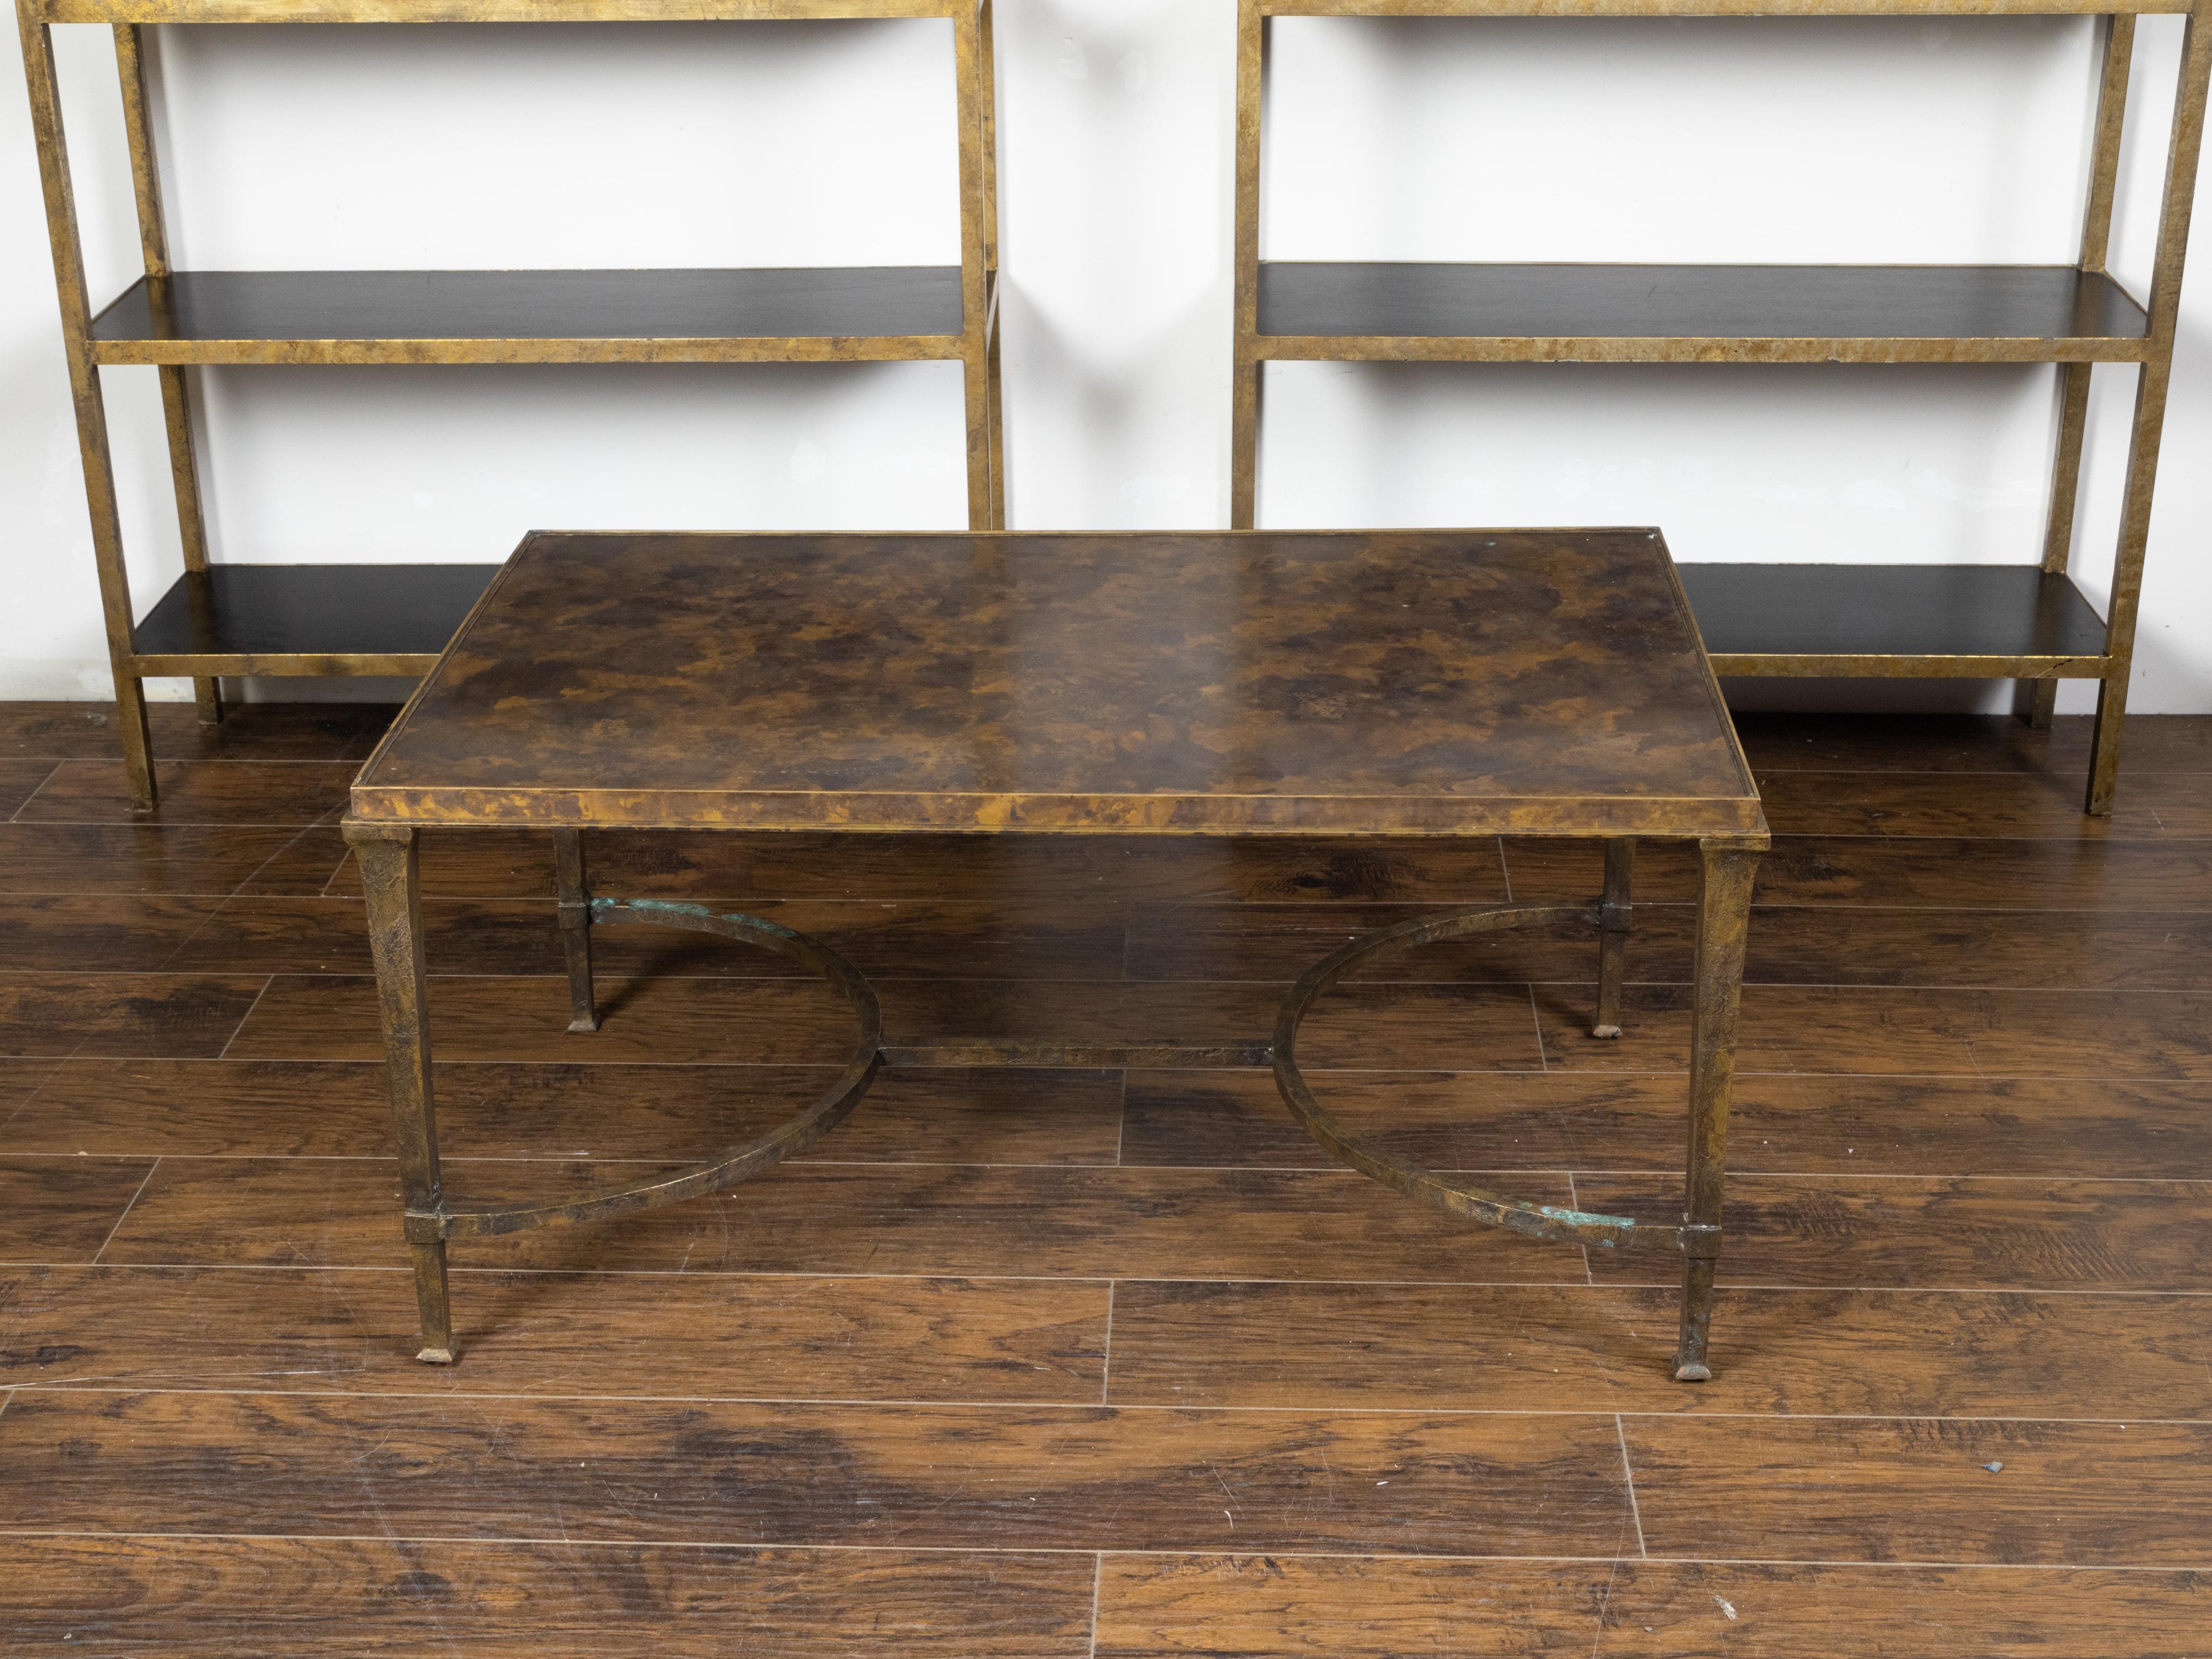 A vintage bronze coffee table from the mid 20th century, with marbleized top and double half-moon cross stretcher. Created during the midcentury period, this coffee table features a rectangular marbleized top sitting above an elegant bronze base